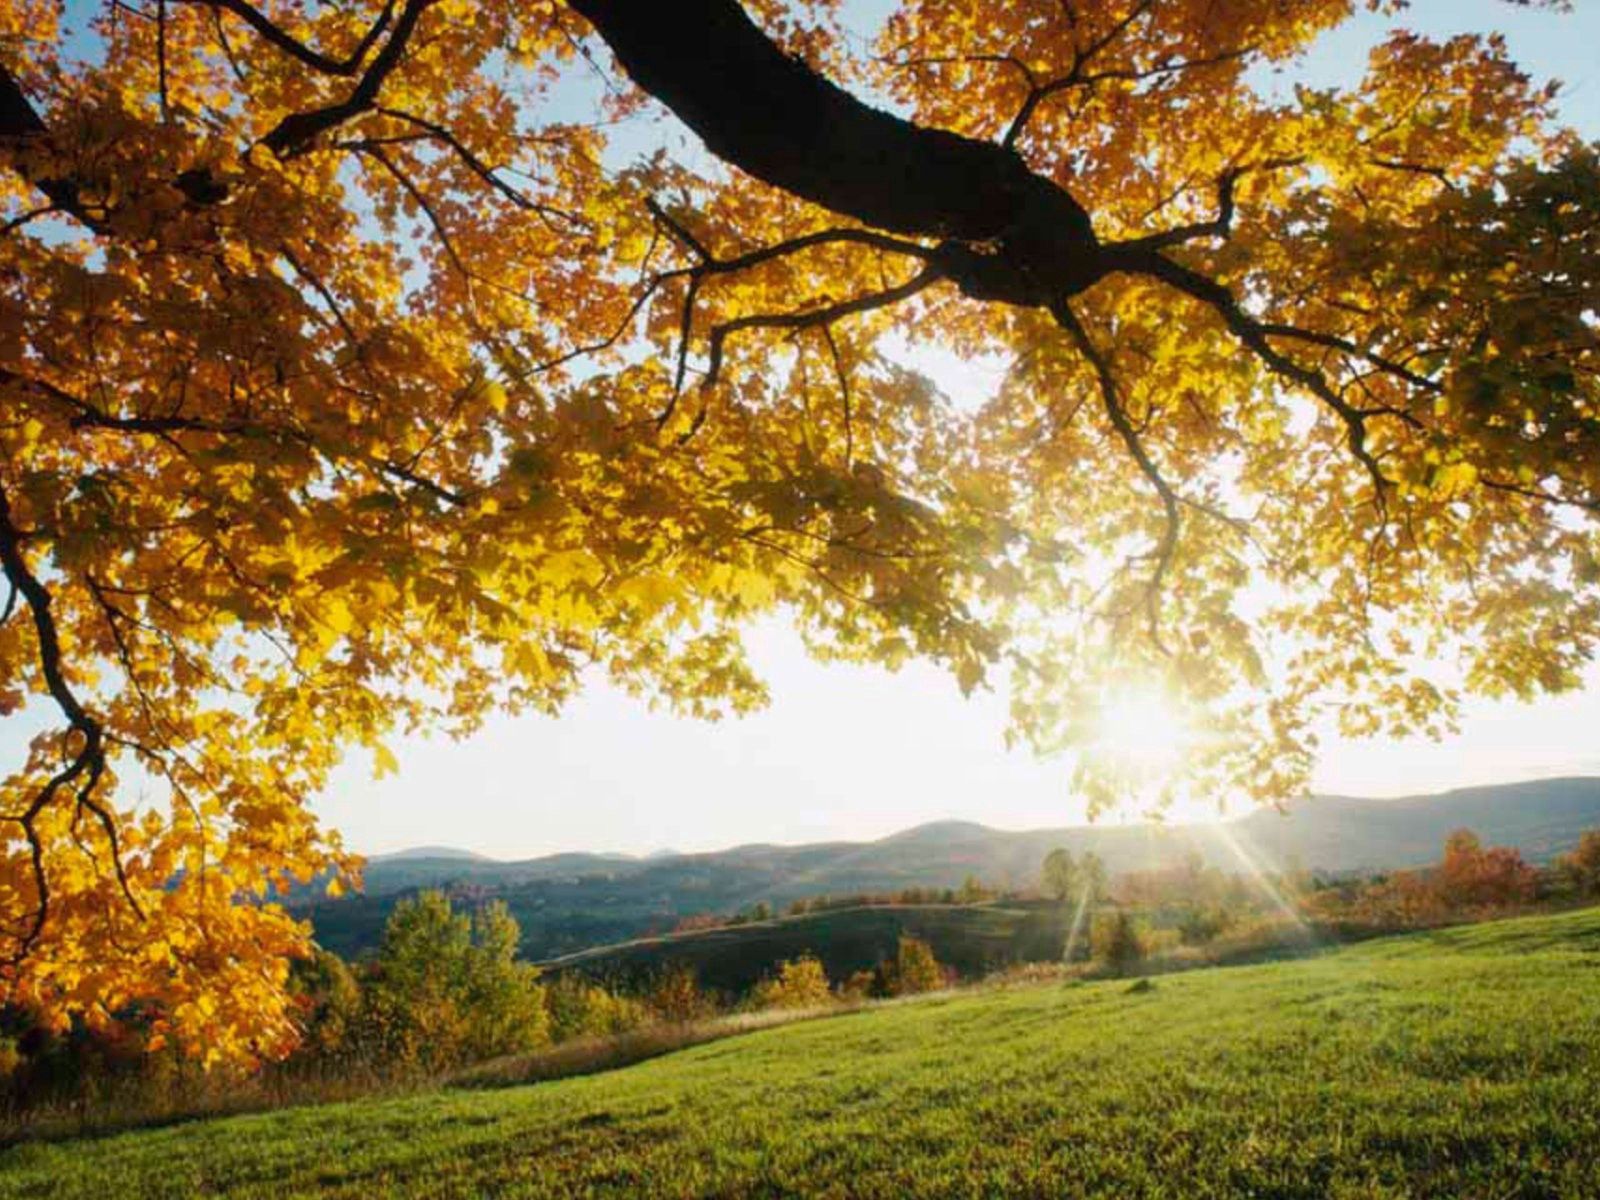 Download wallpaper 1600x1200 sun rays, branches, tree, leaves, yellow, autumn, light, meadow standard 4:3 HD background